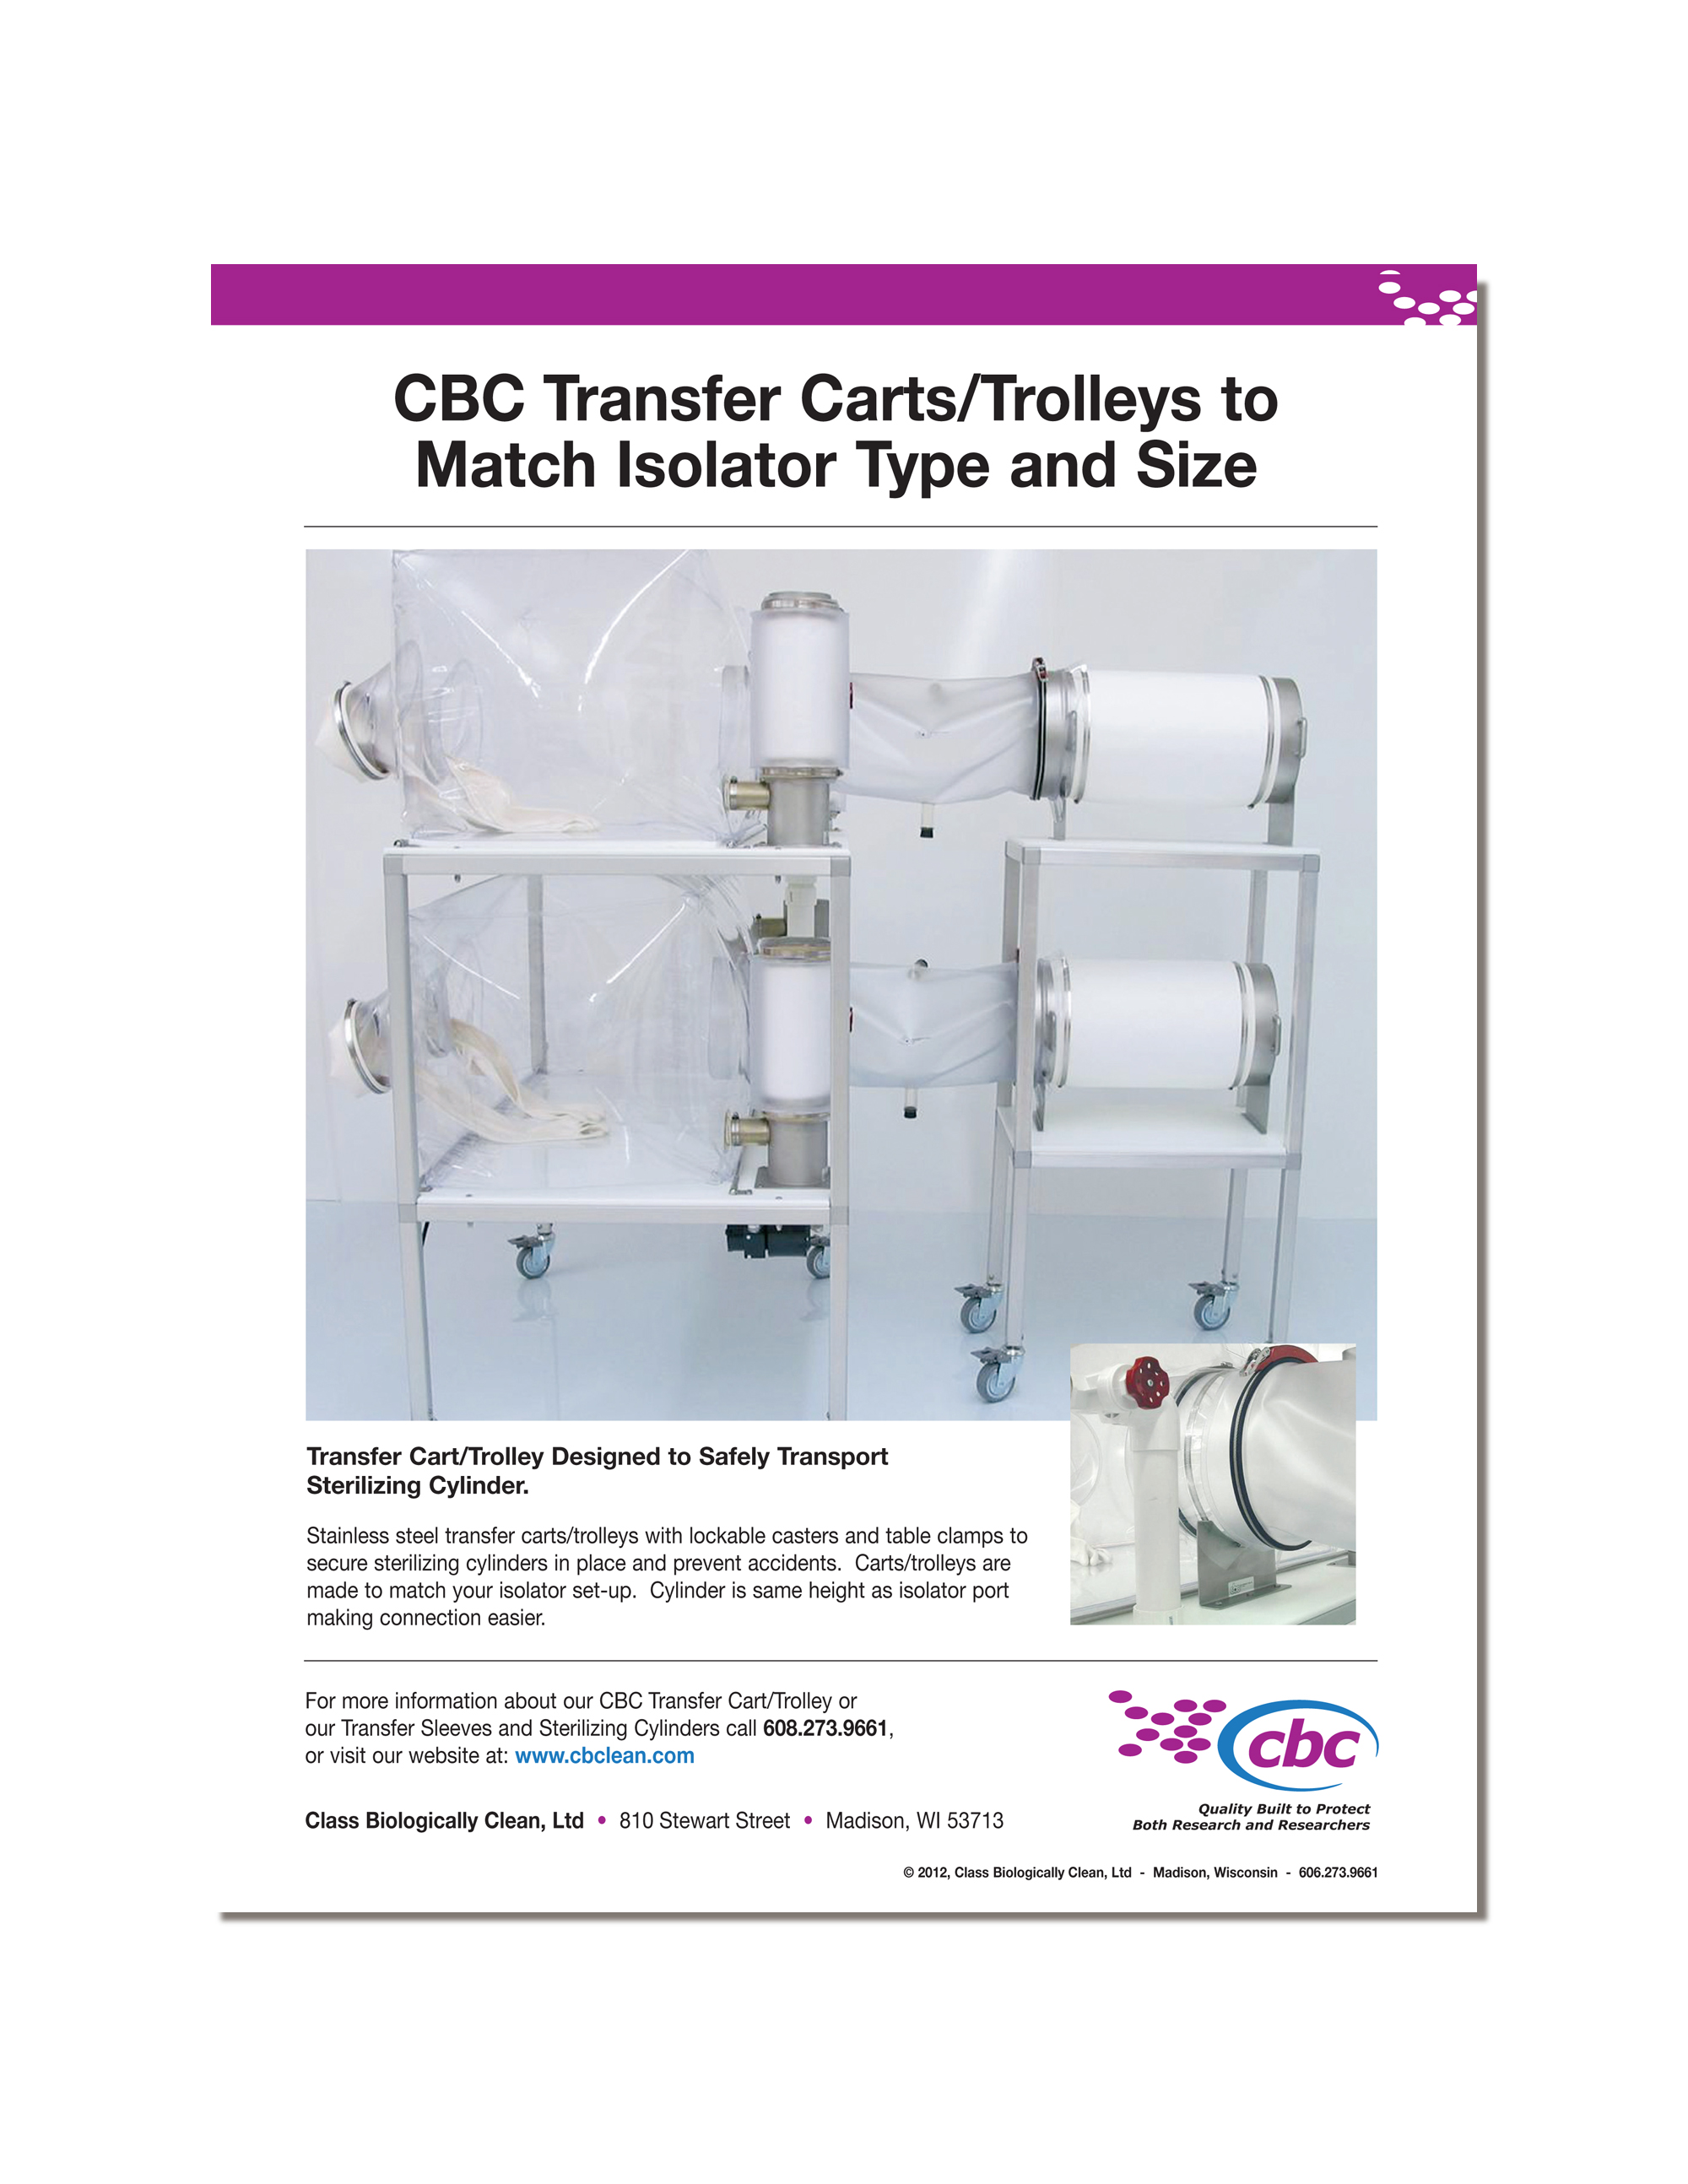 Download a printable flyer about CBC's Transfer Cart/Trolley to safely and securely transport sterilizing cylinders. Click here to download flyer.